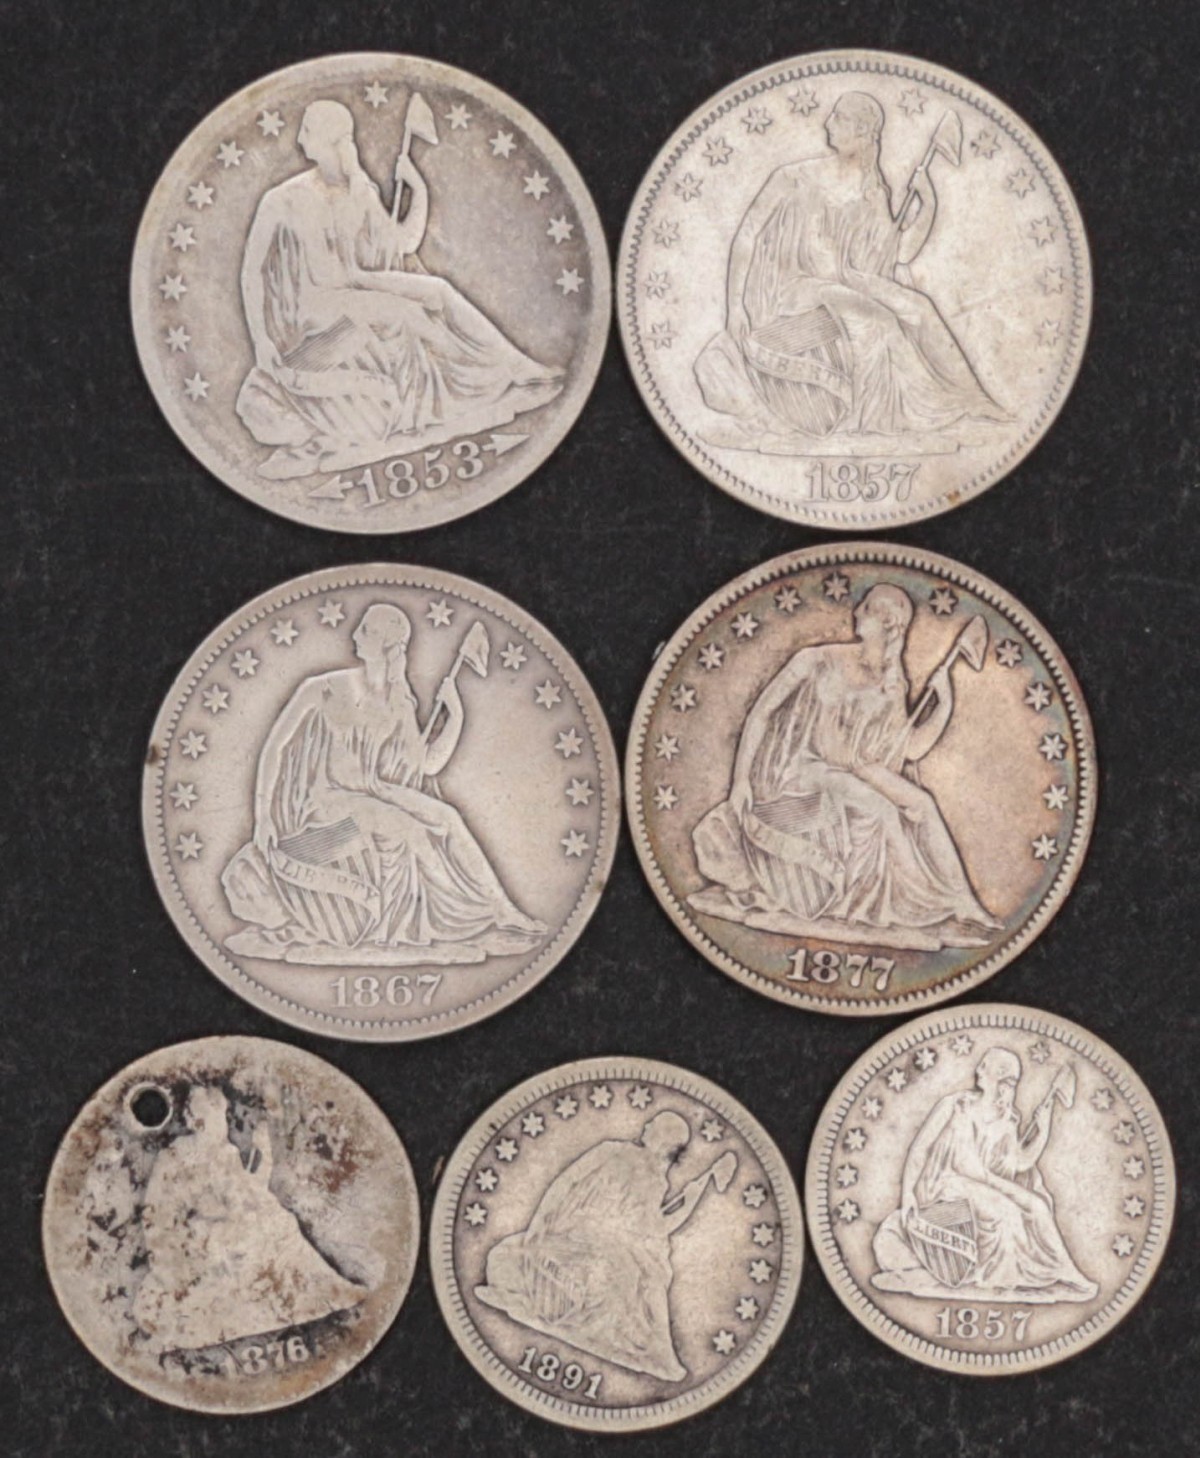 SEATED LIBERTY HALVES AND QUARTERS